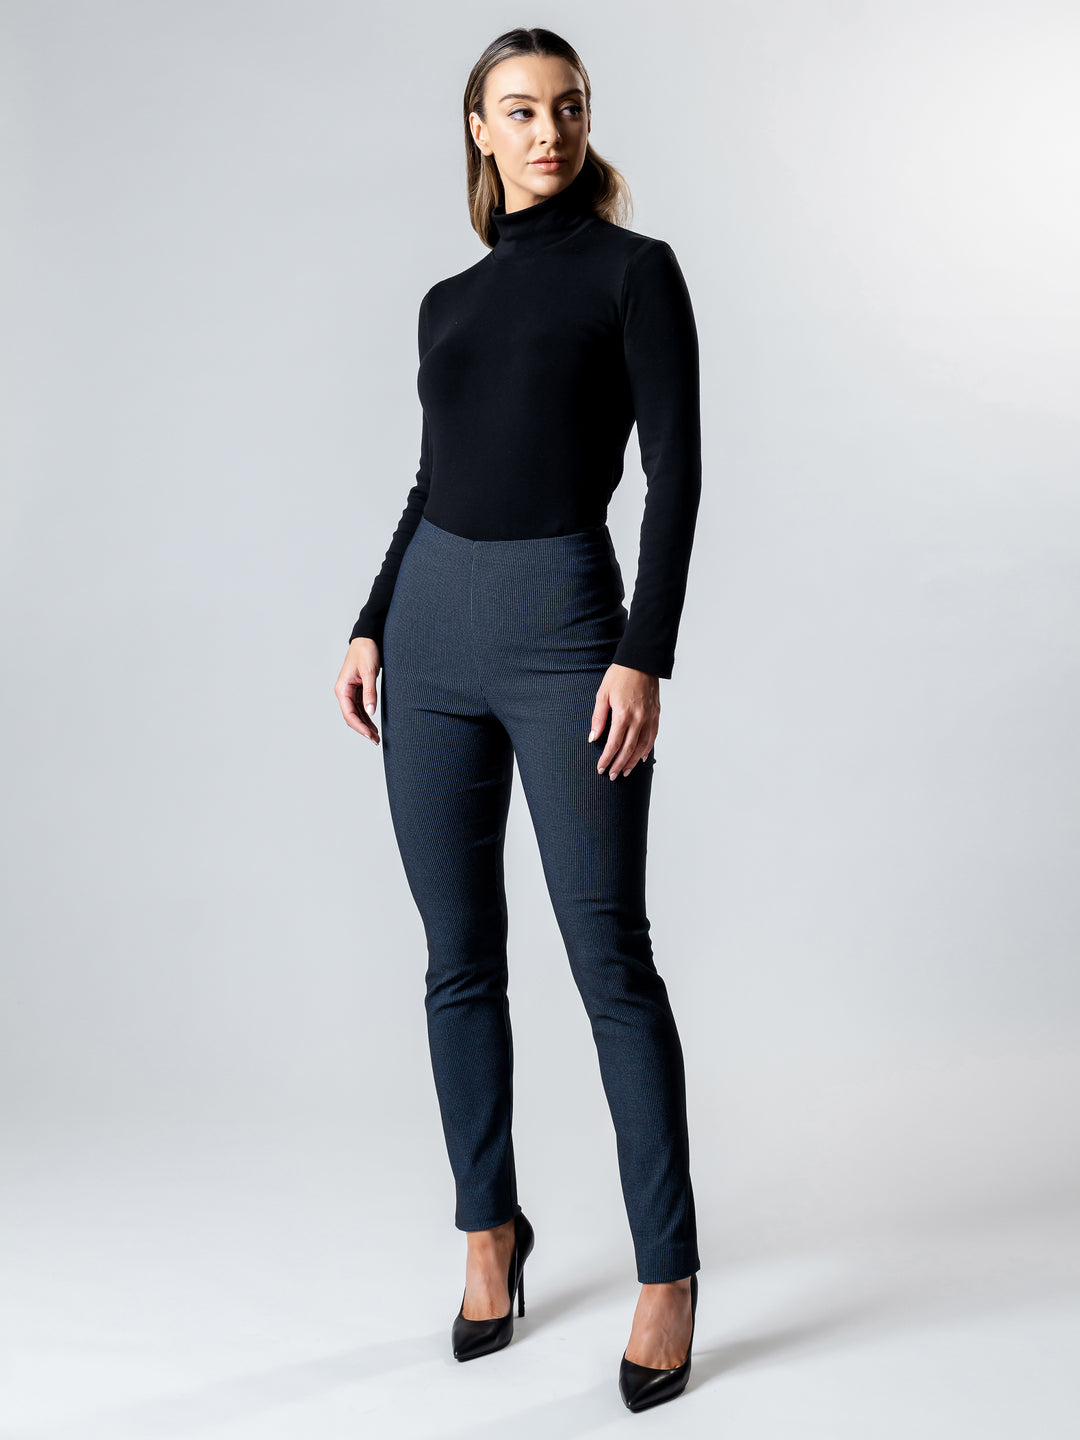 Our Best Slimming Outfit Tips For Back-to-work – SLIMMING, 42% OFF